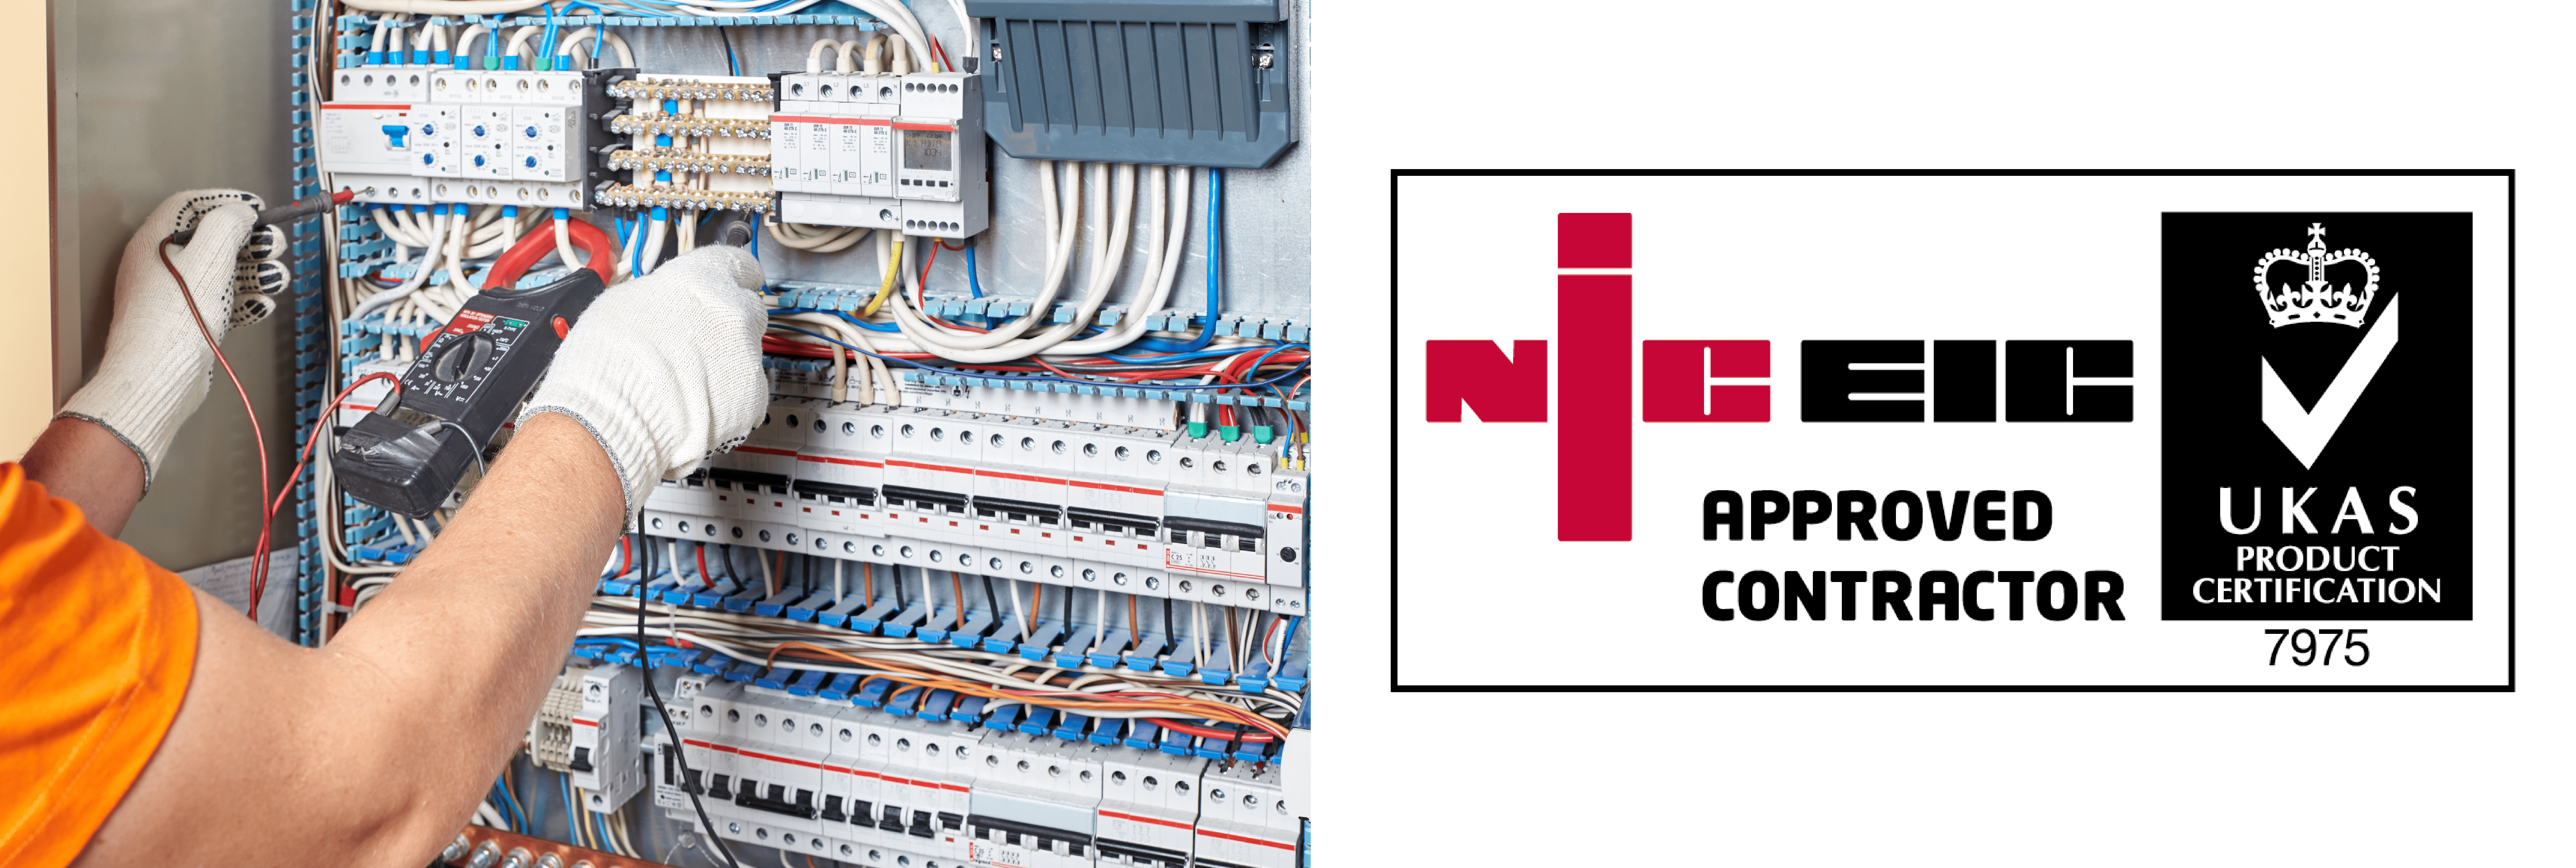 Shields Awarded NICEIC Approved Contractor Status